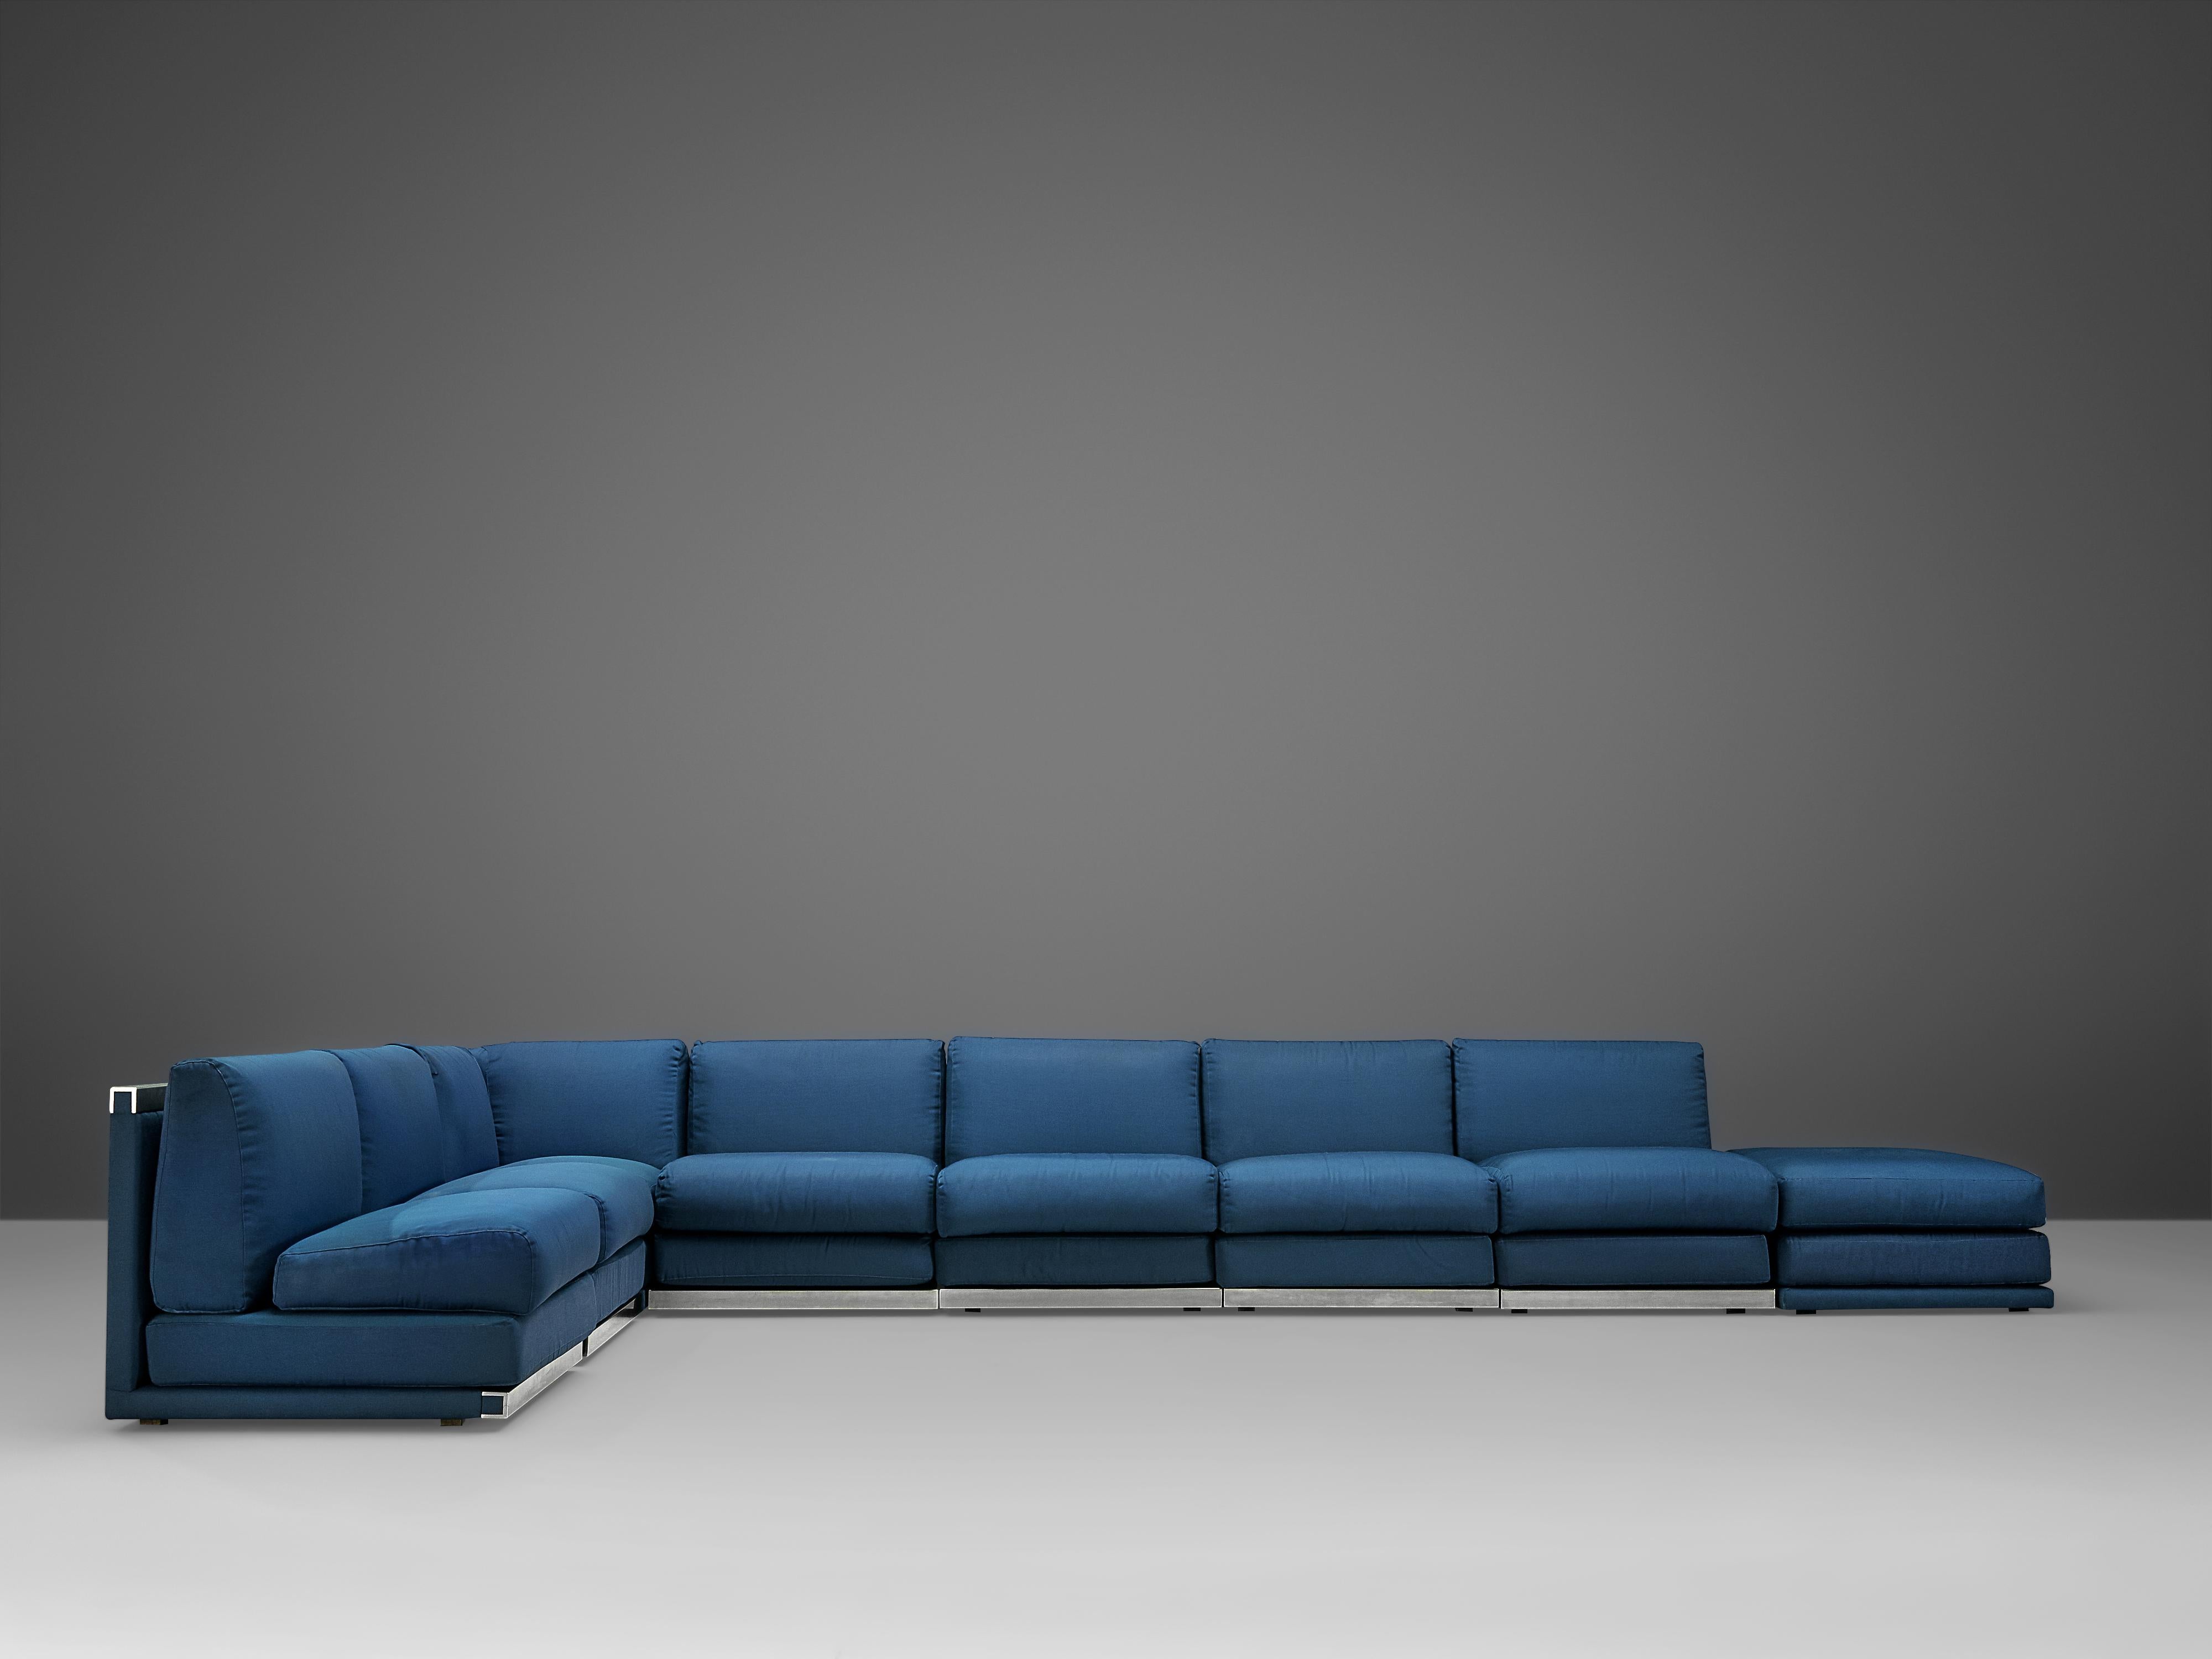 Post-Modern Large Postmodern Sectional Sofa in Blue Upholstery and Aluminum